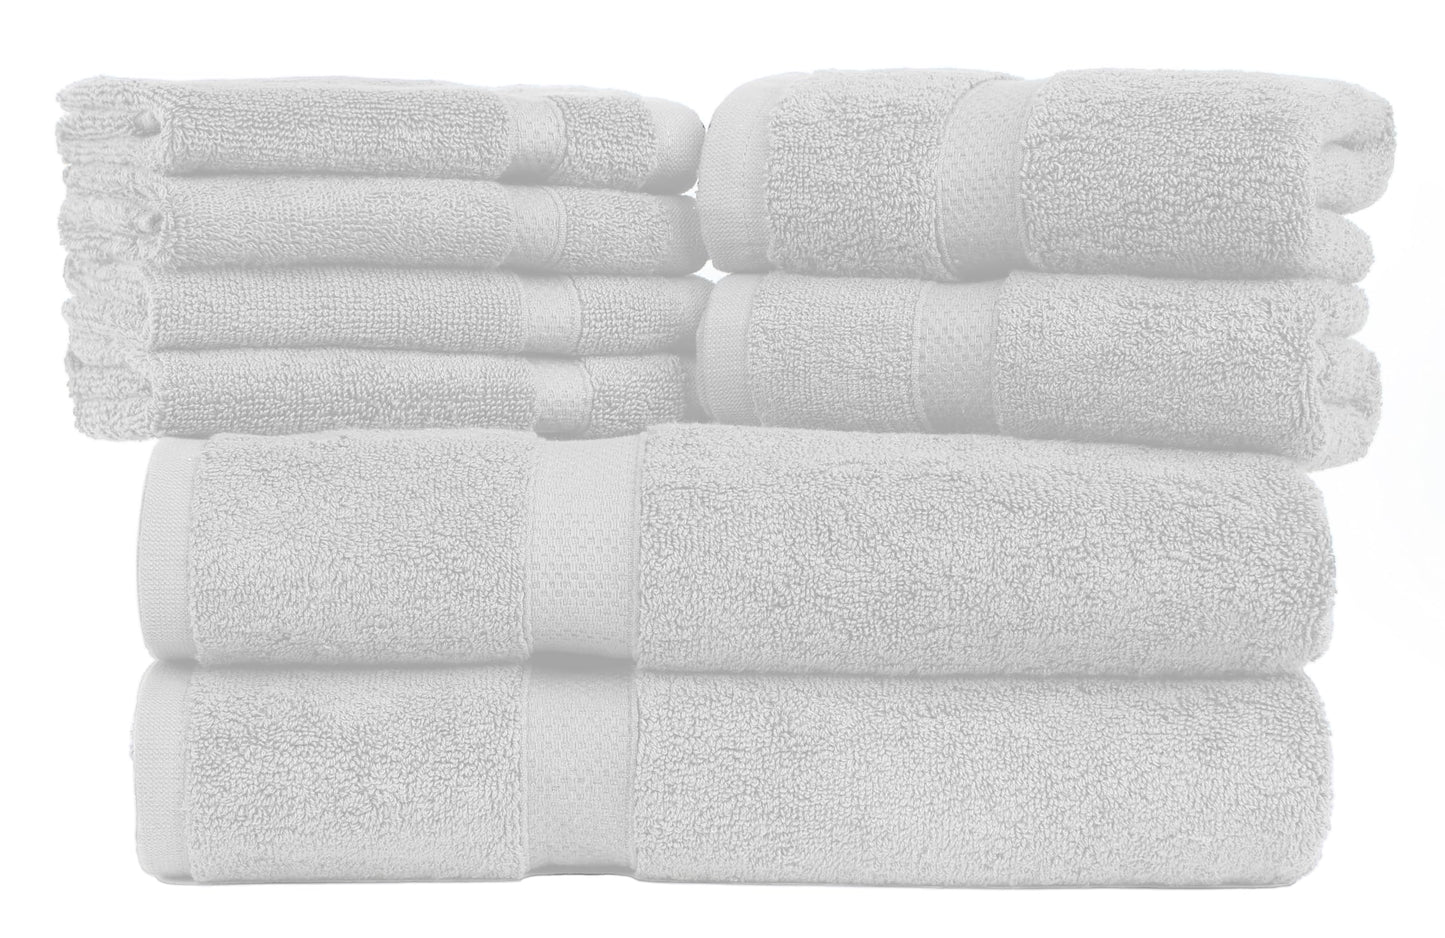 ZAPPLE luxury 8 piece towel set, 100% pure cotton, 2 bath towels, 2 hand towels, 4 washcloths 600 gsm ultra absorbant, White, for bathrooms, kitchen, hotels, gym and home use